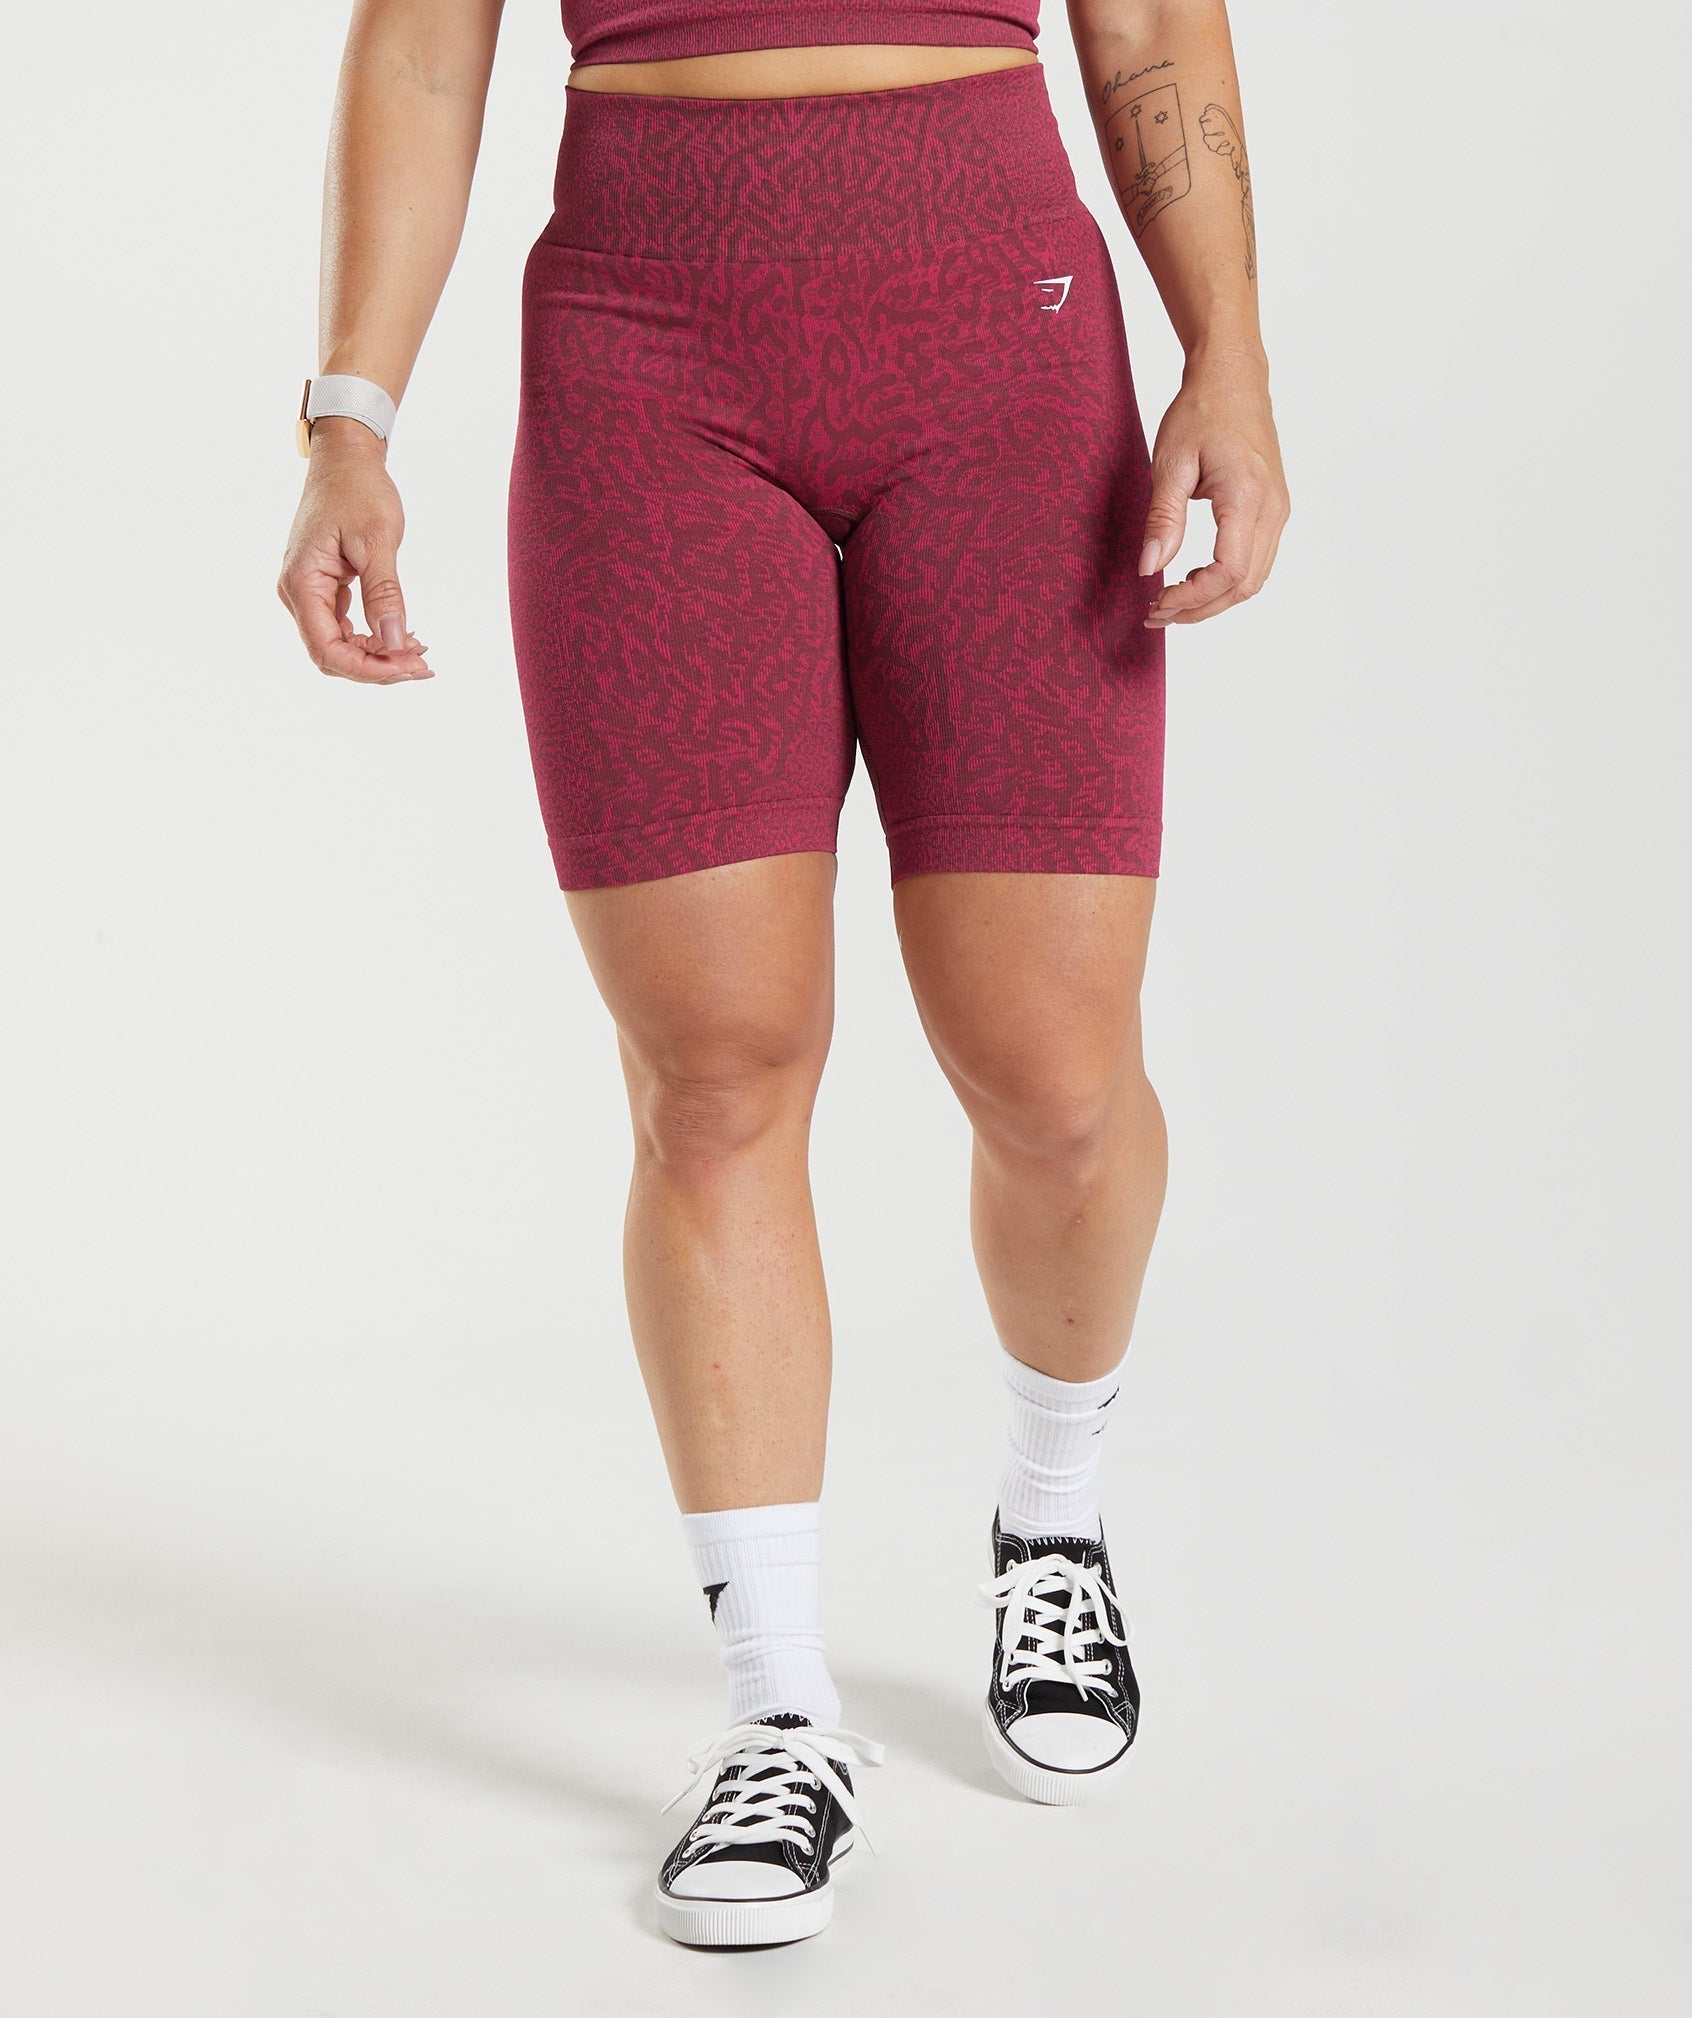 Adapt Animal Seamless Cycling Shorts in Reef | Cherry Brown - view 1